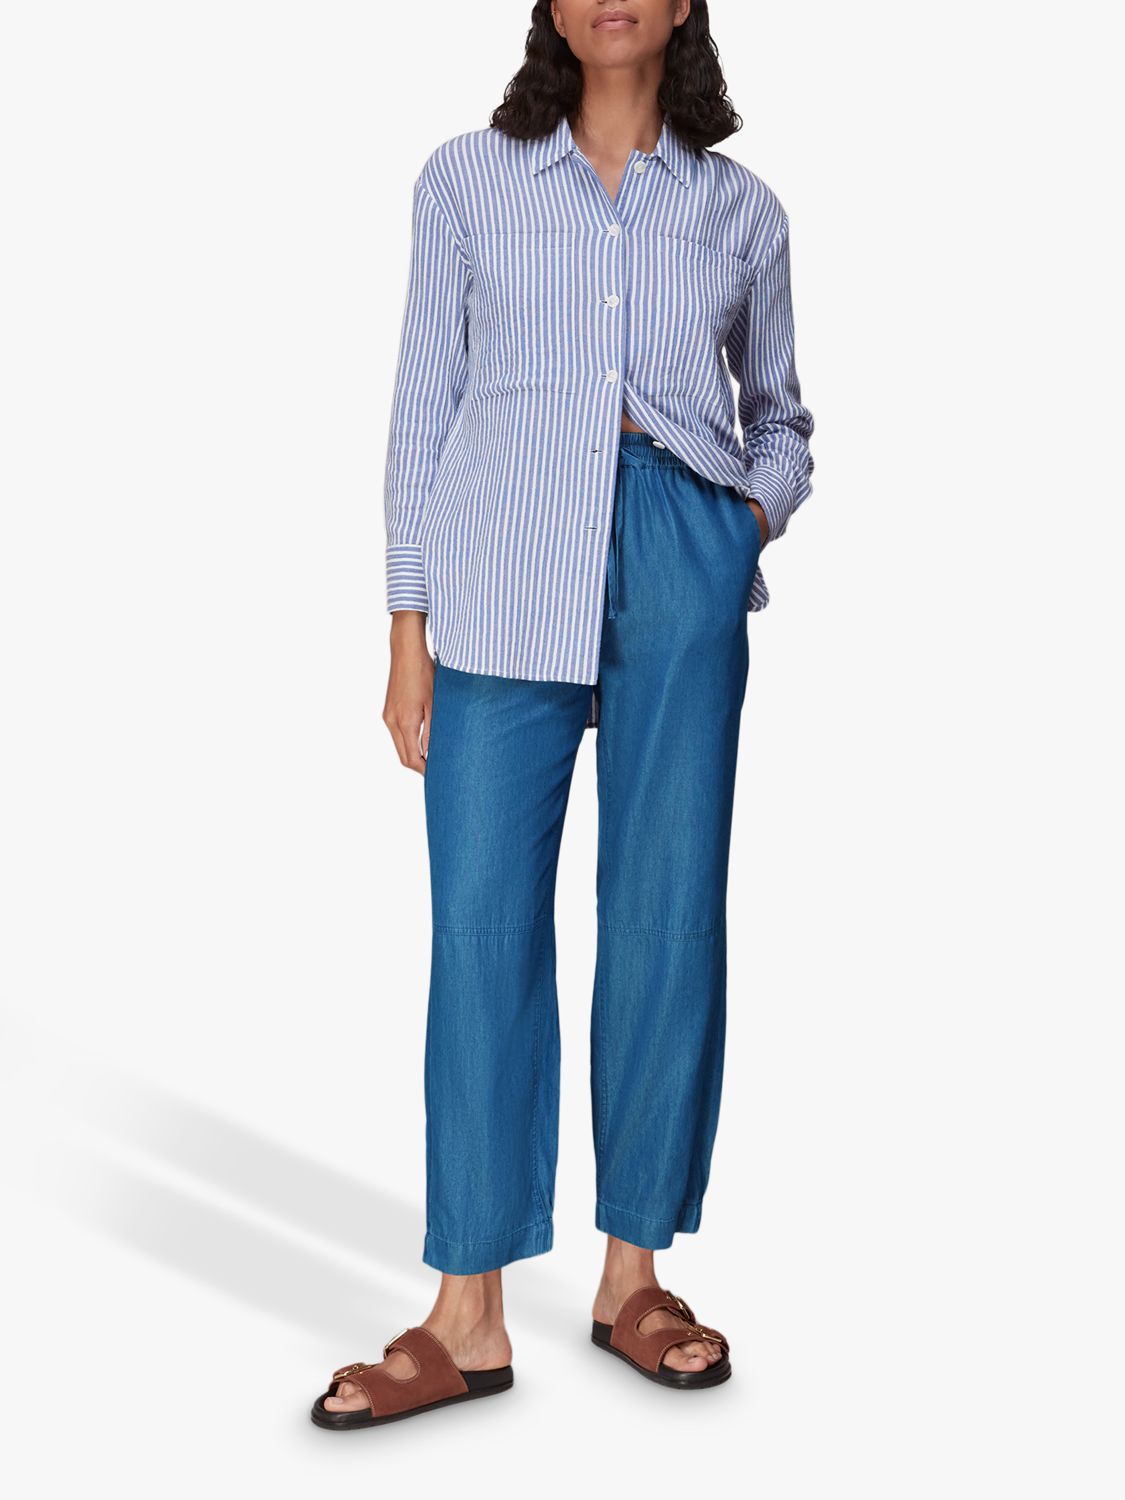 Whistles Lucy Barrel Trousers, Chambray at John Lewis & Partners